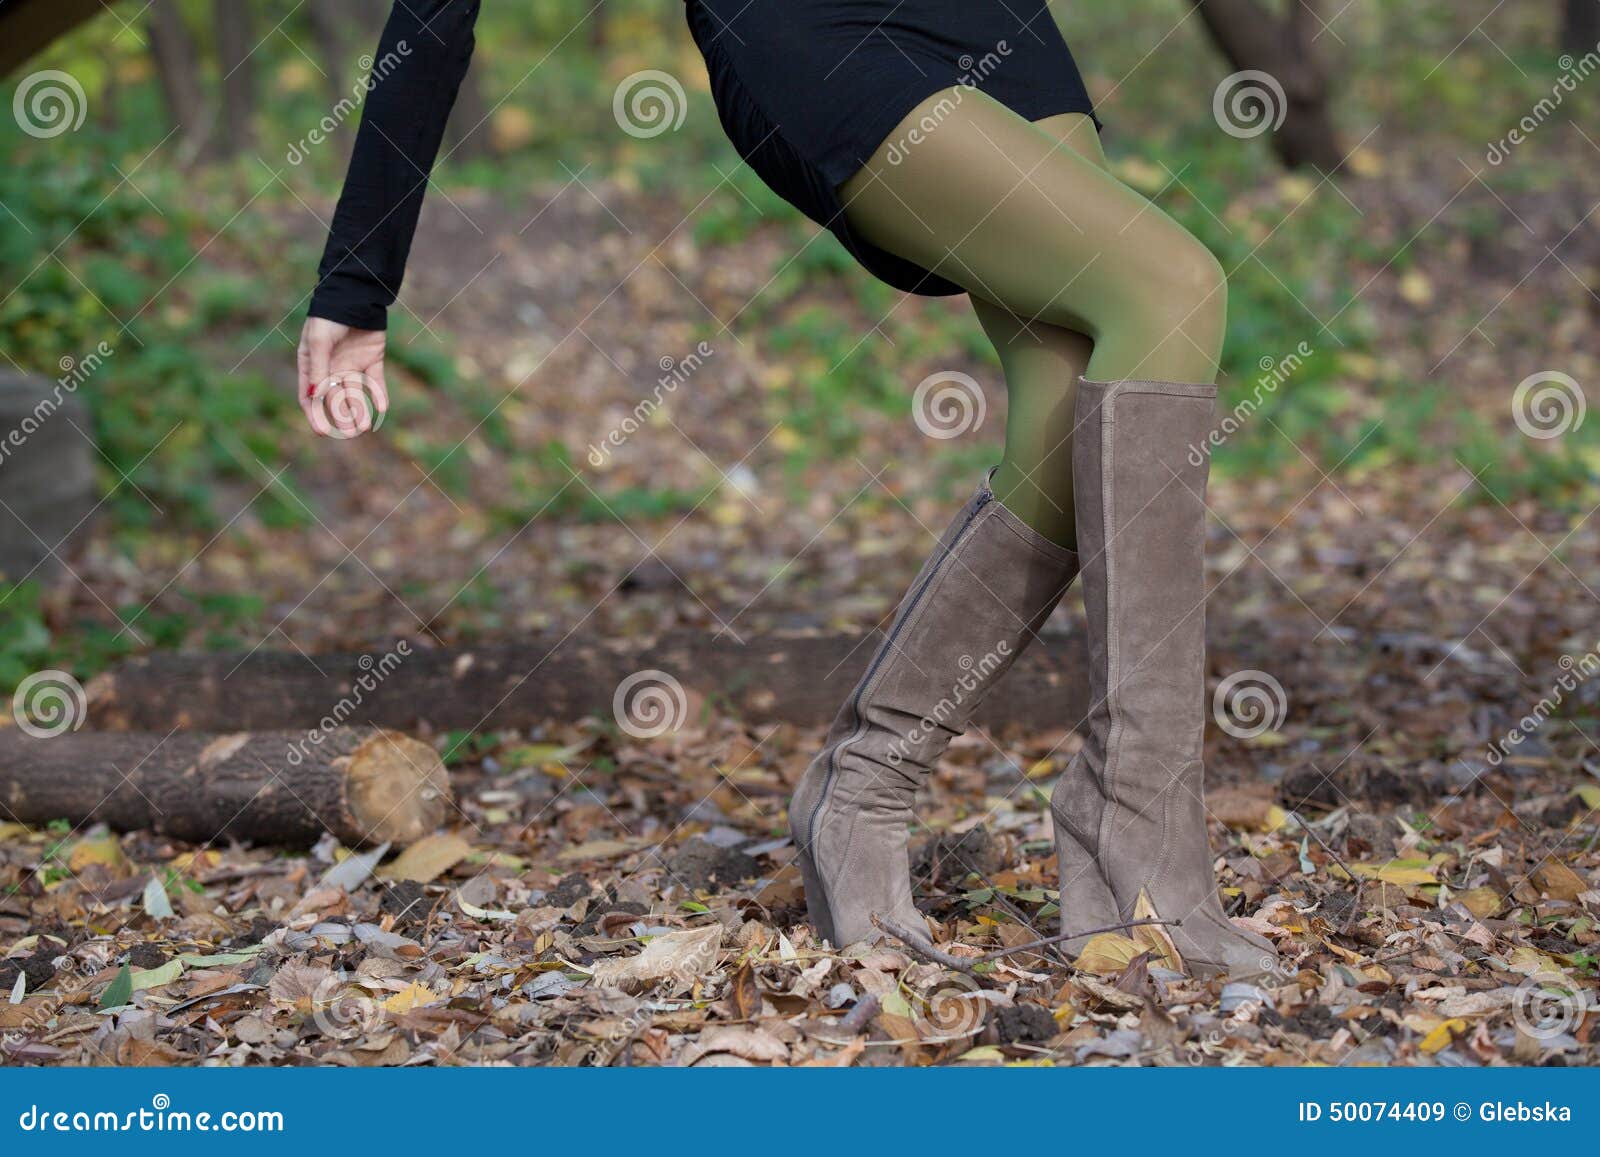 Elegant Girl in Suede Boots Walking in the Woods Stock Image - Image of ...